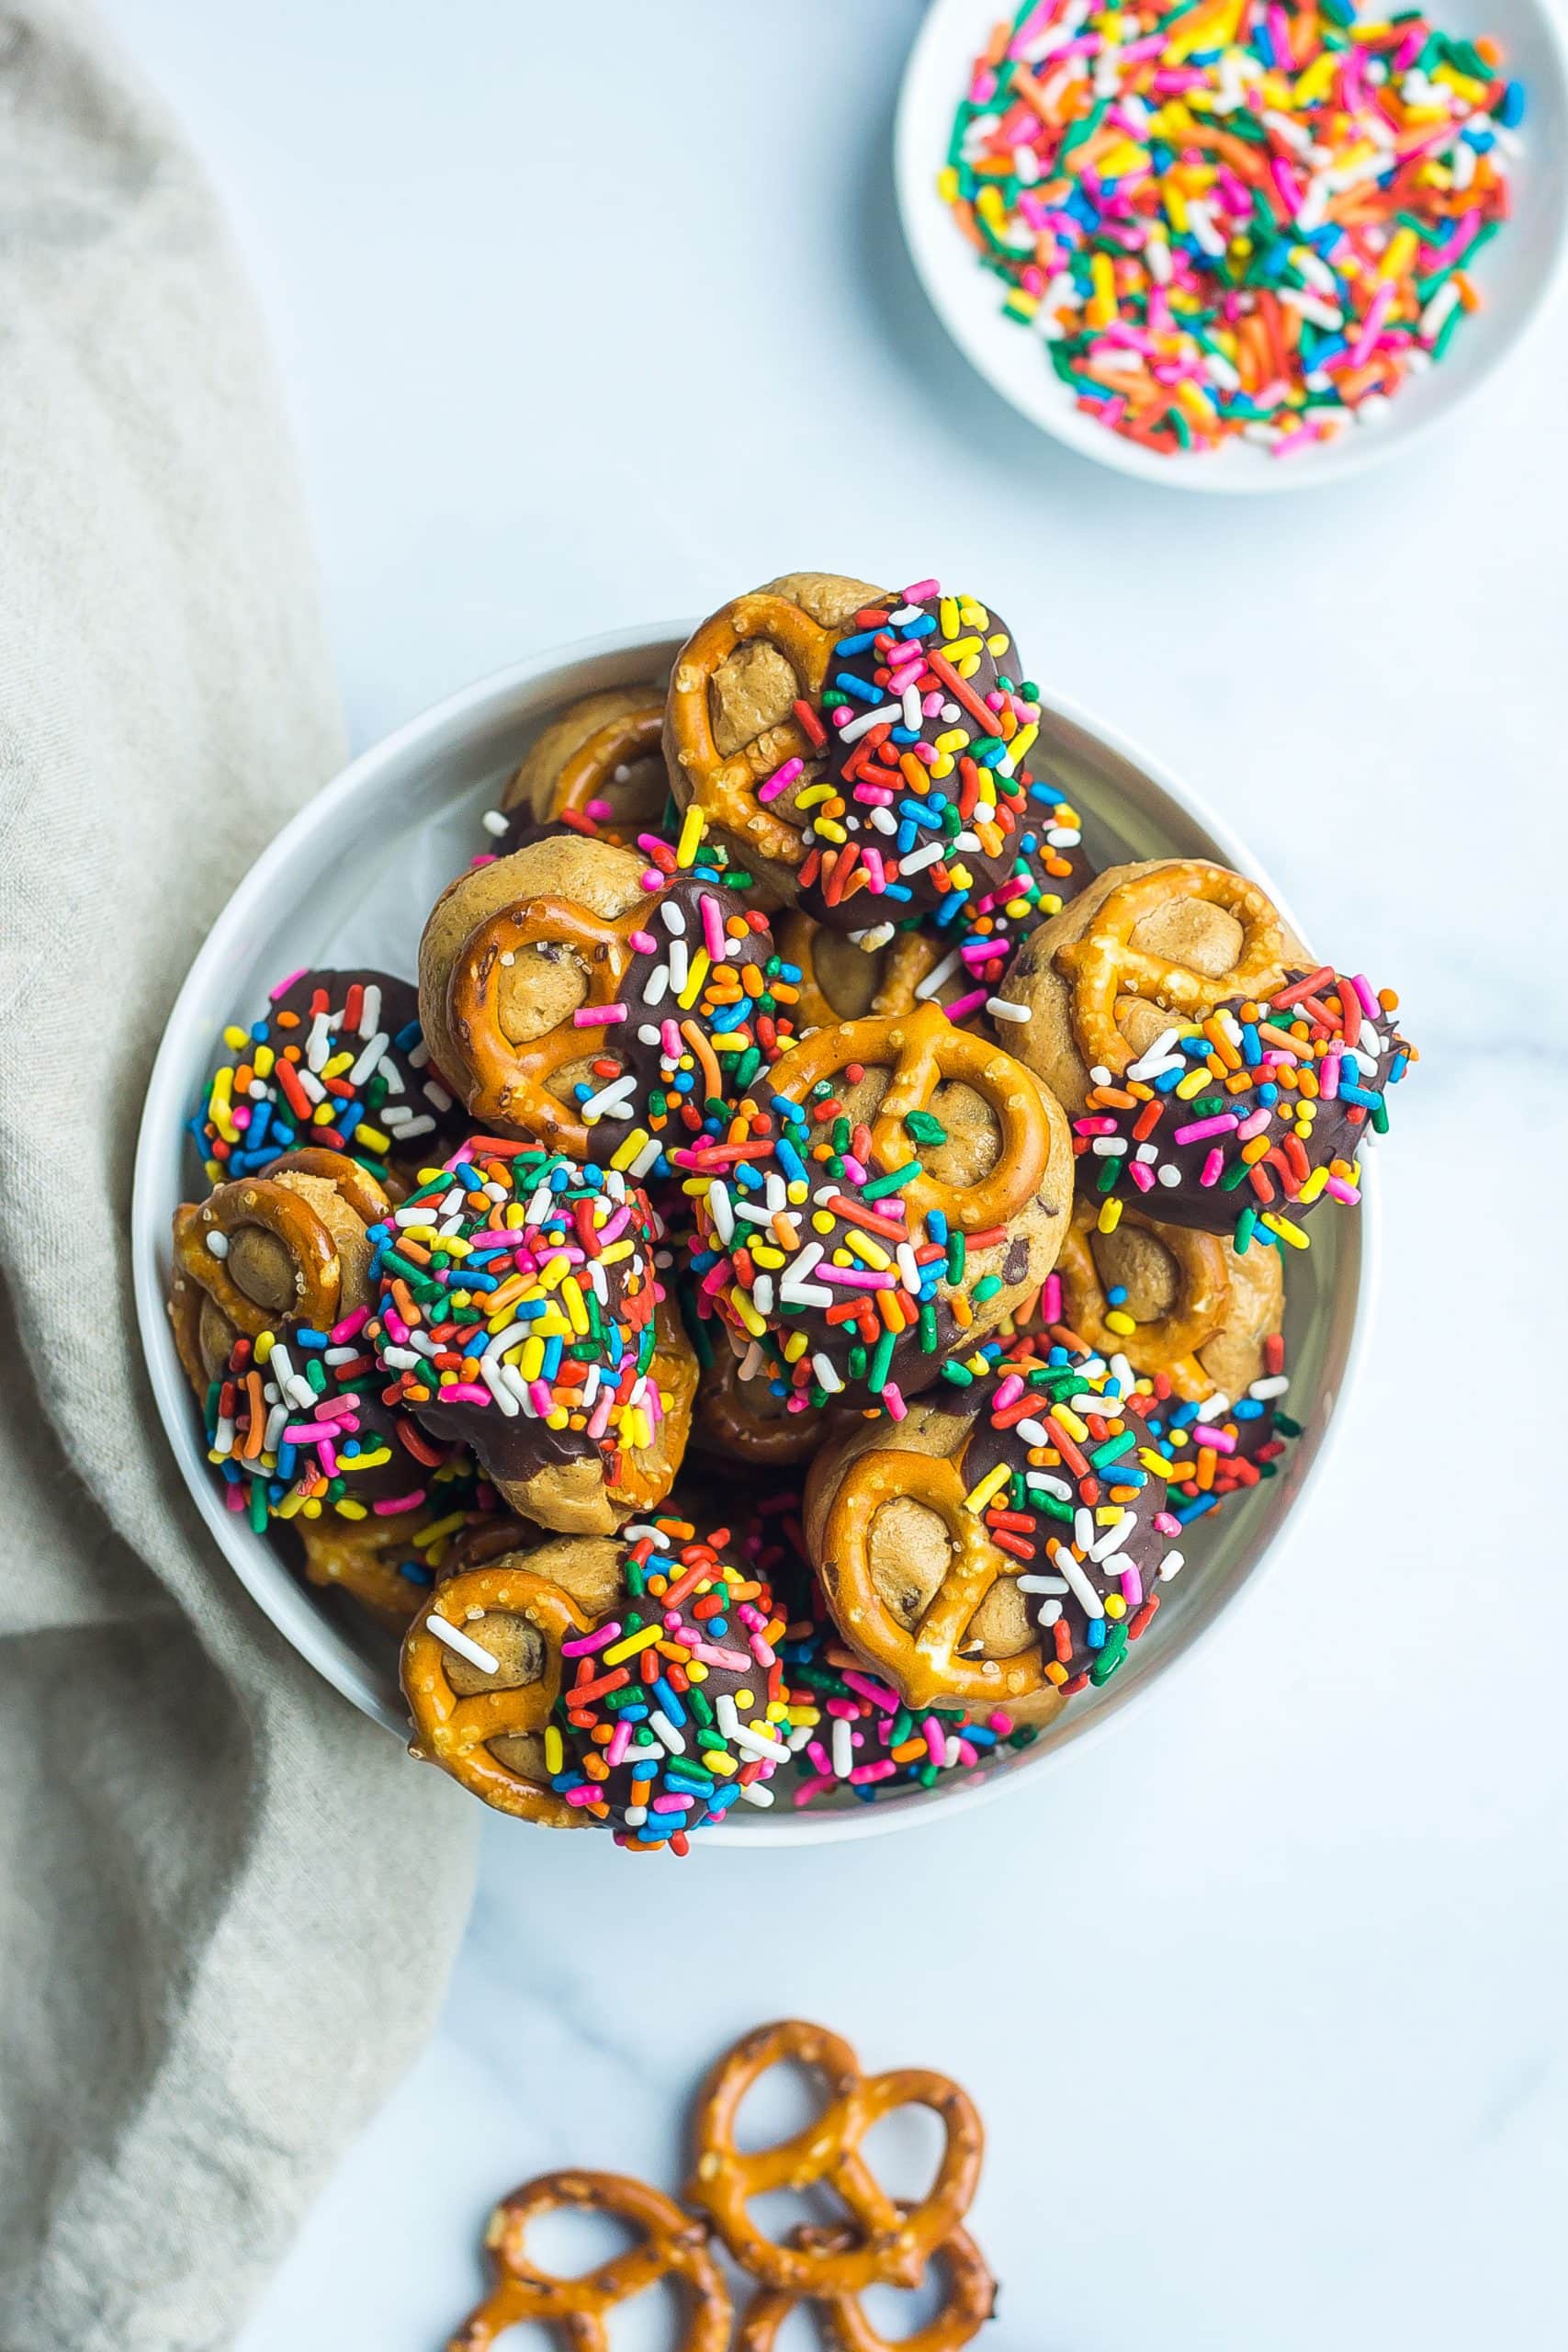 bowl of chocolate dipped pretzels with sprinkles